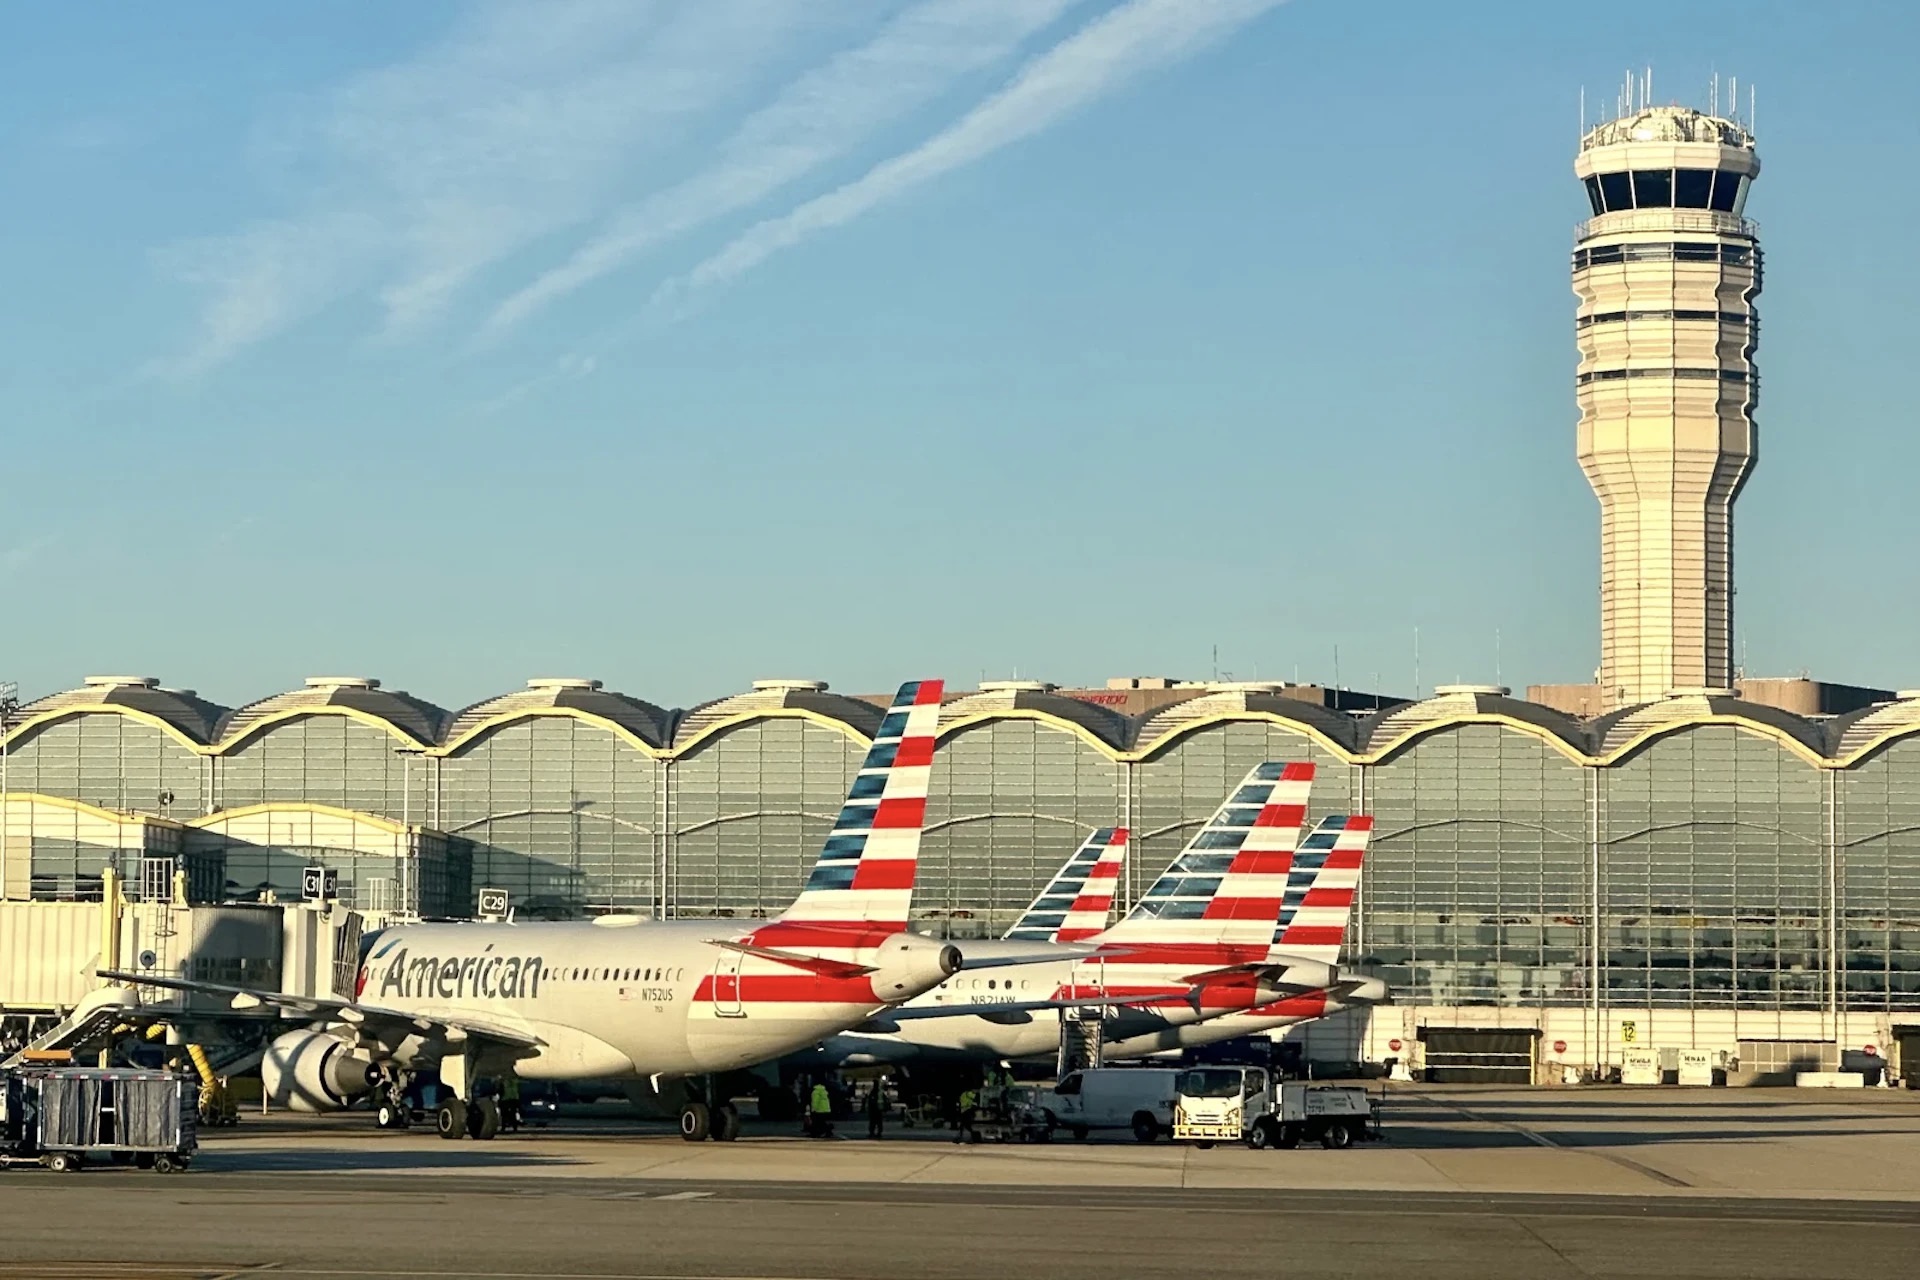 American Airlines planes at an airport